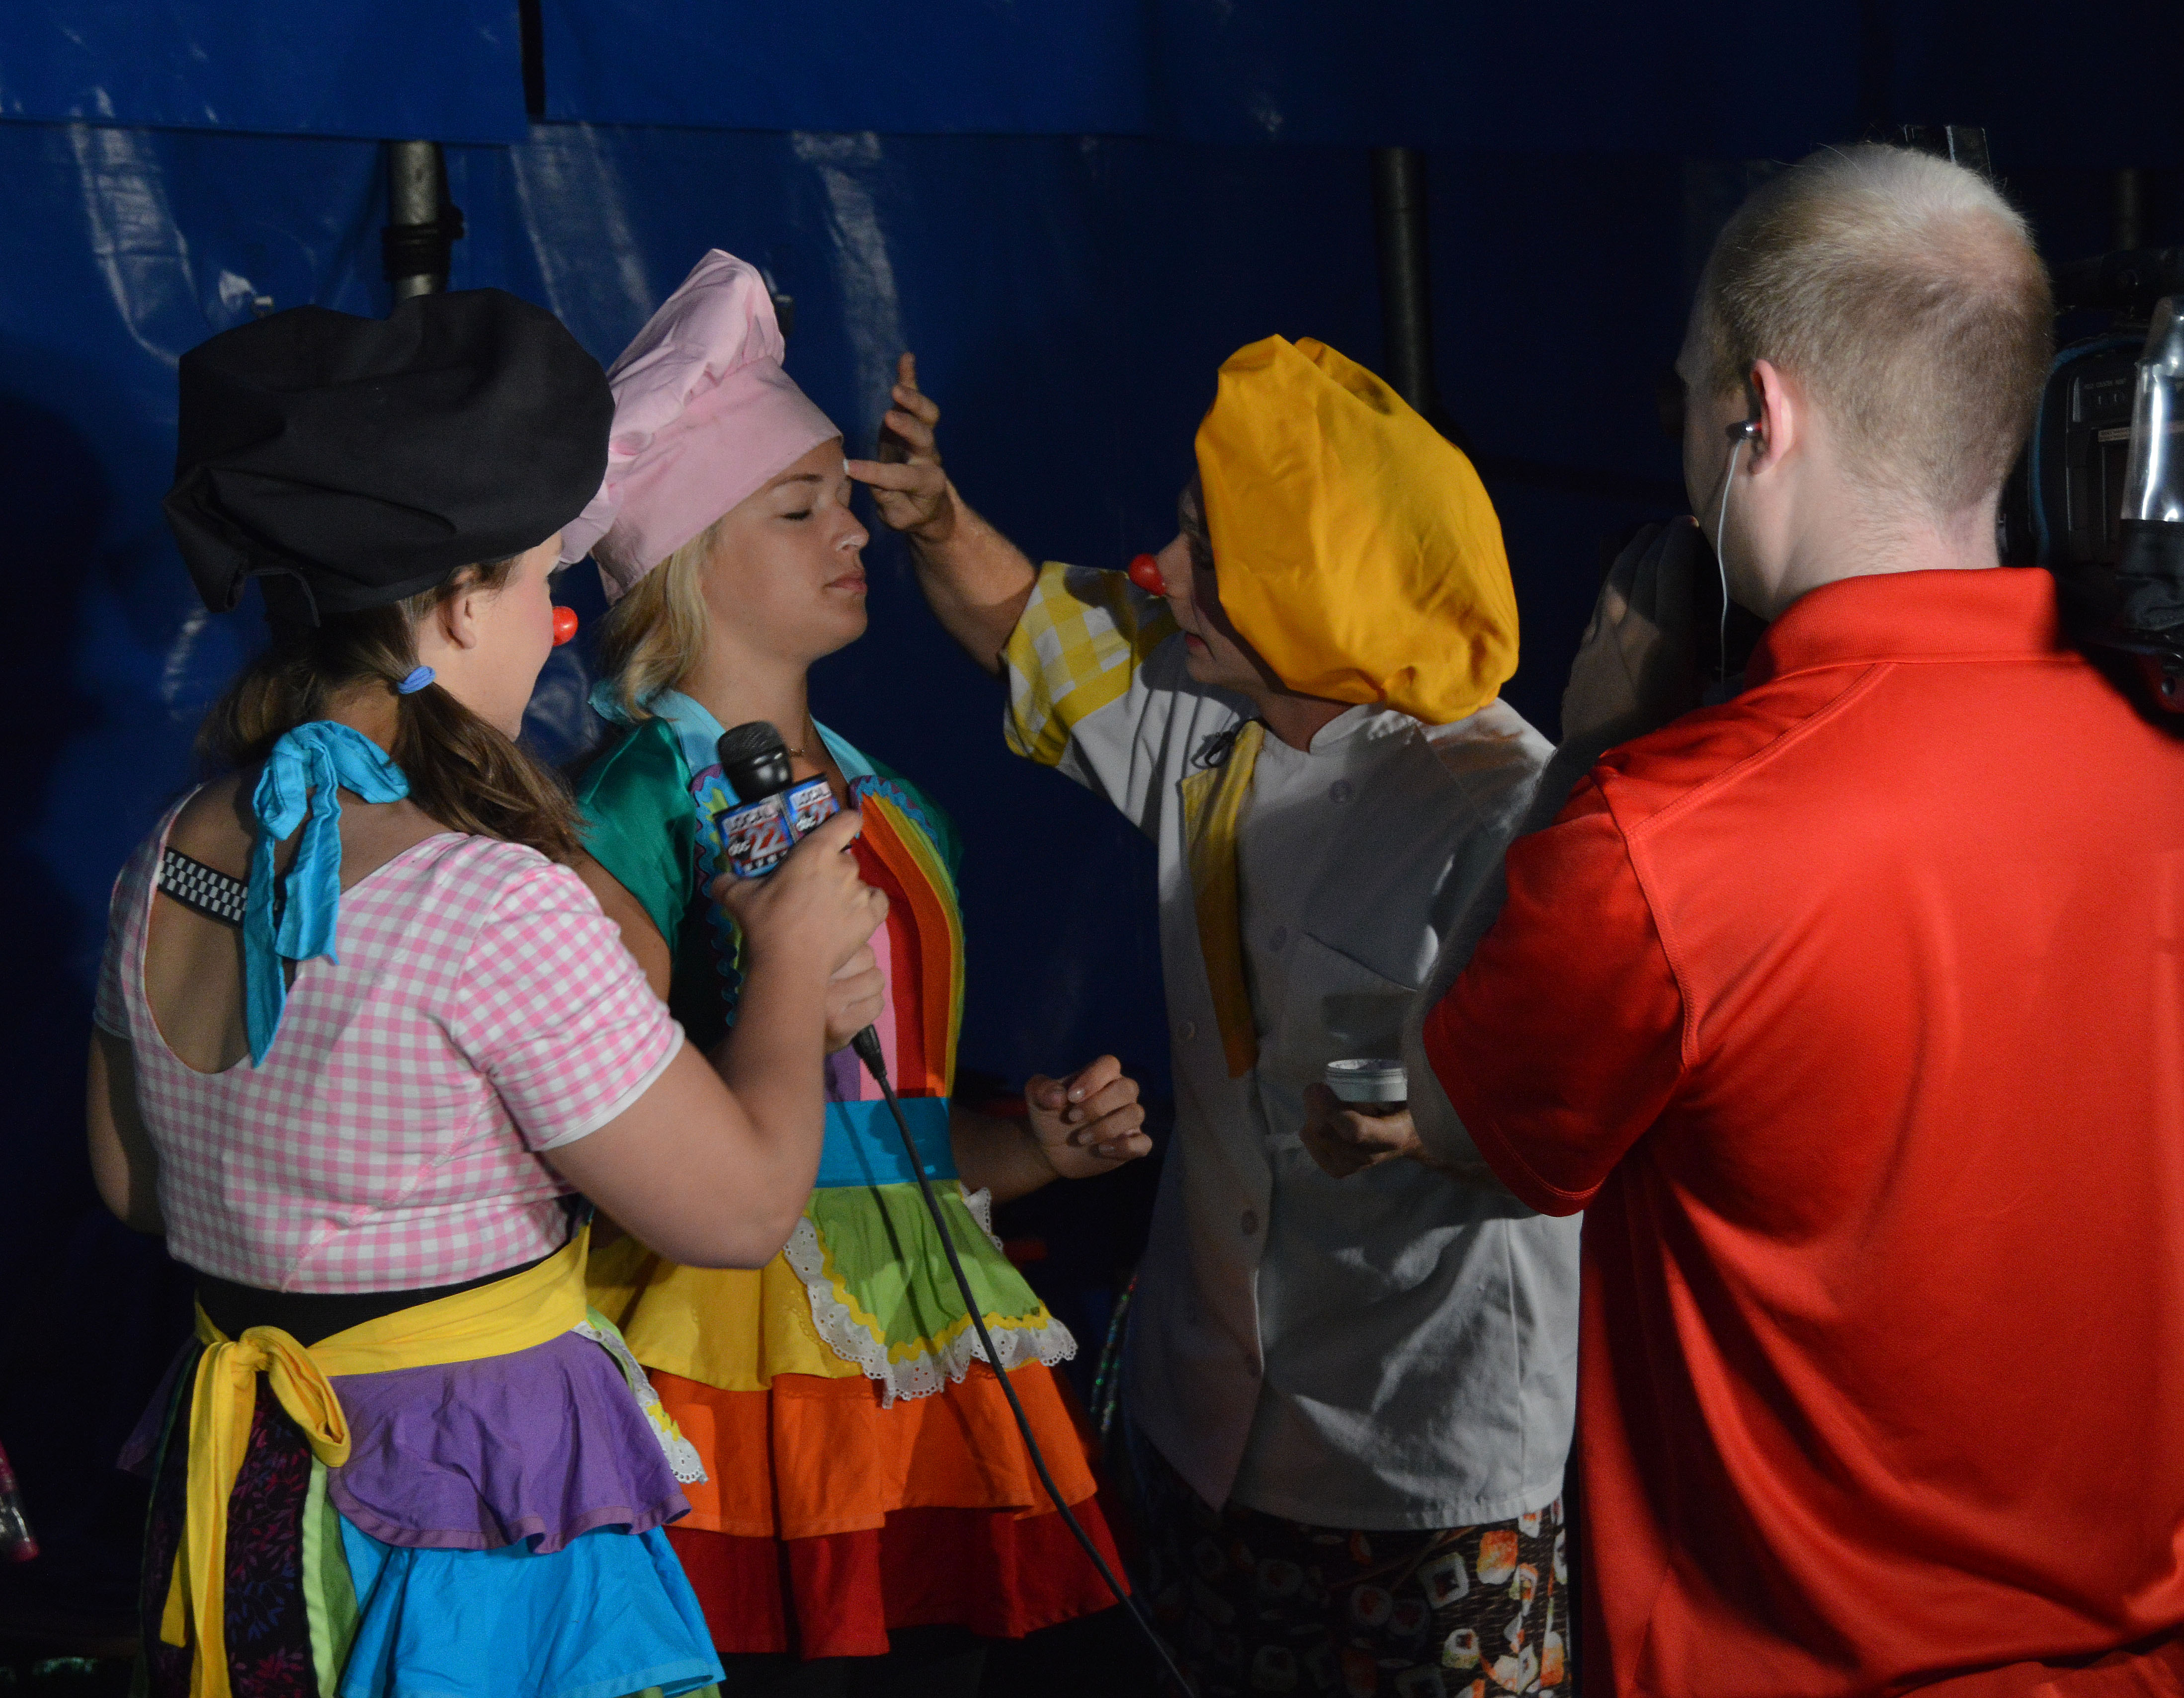 Local VT FOX 44 and ABC 22 reporter getting clown make-up tutorials from clowns Joy Powers and Josh Shack, July 9, 2015.